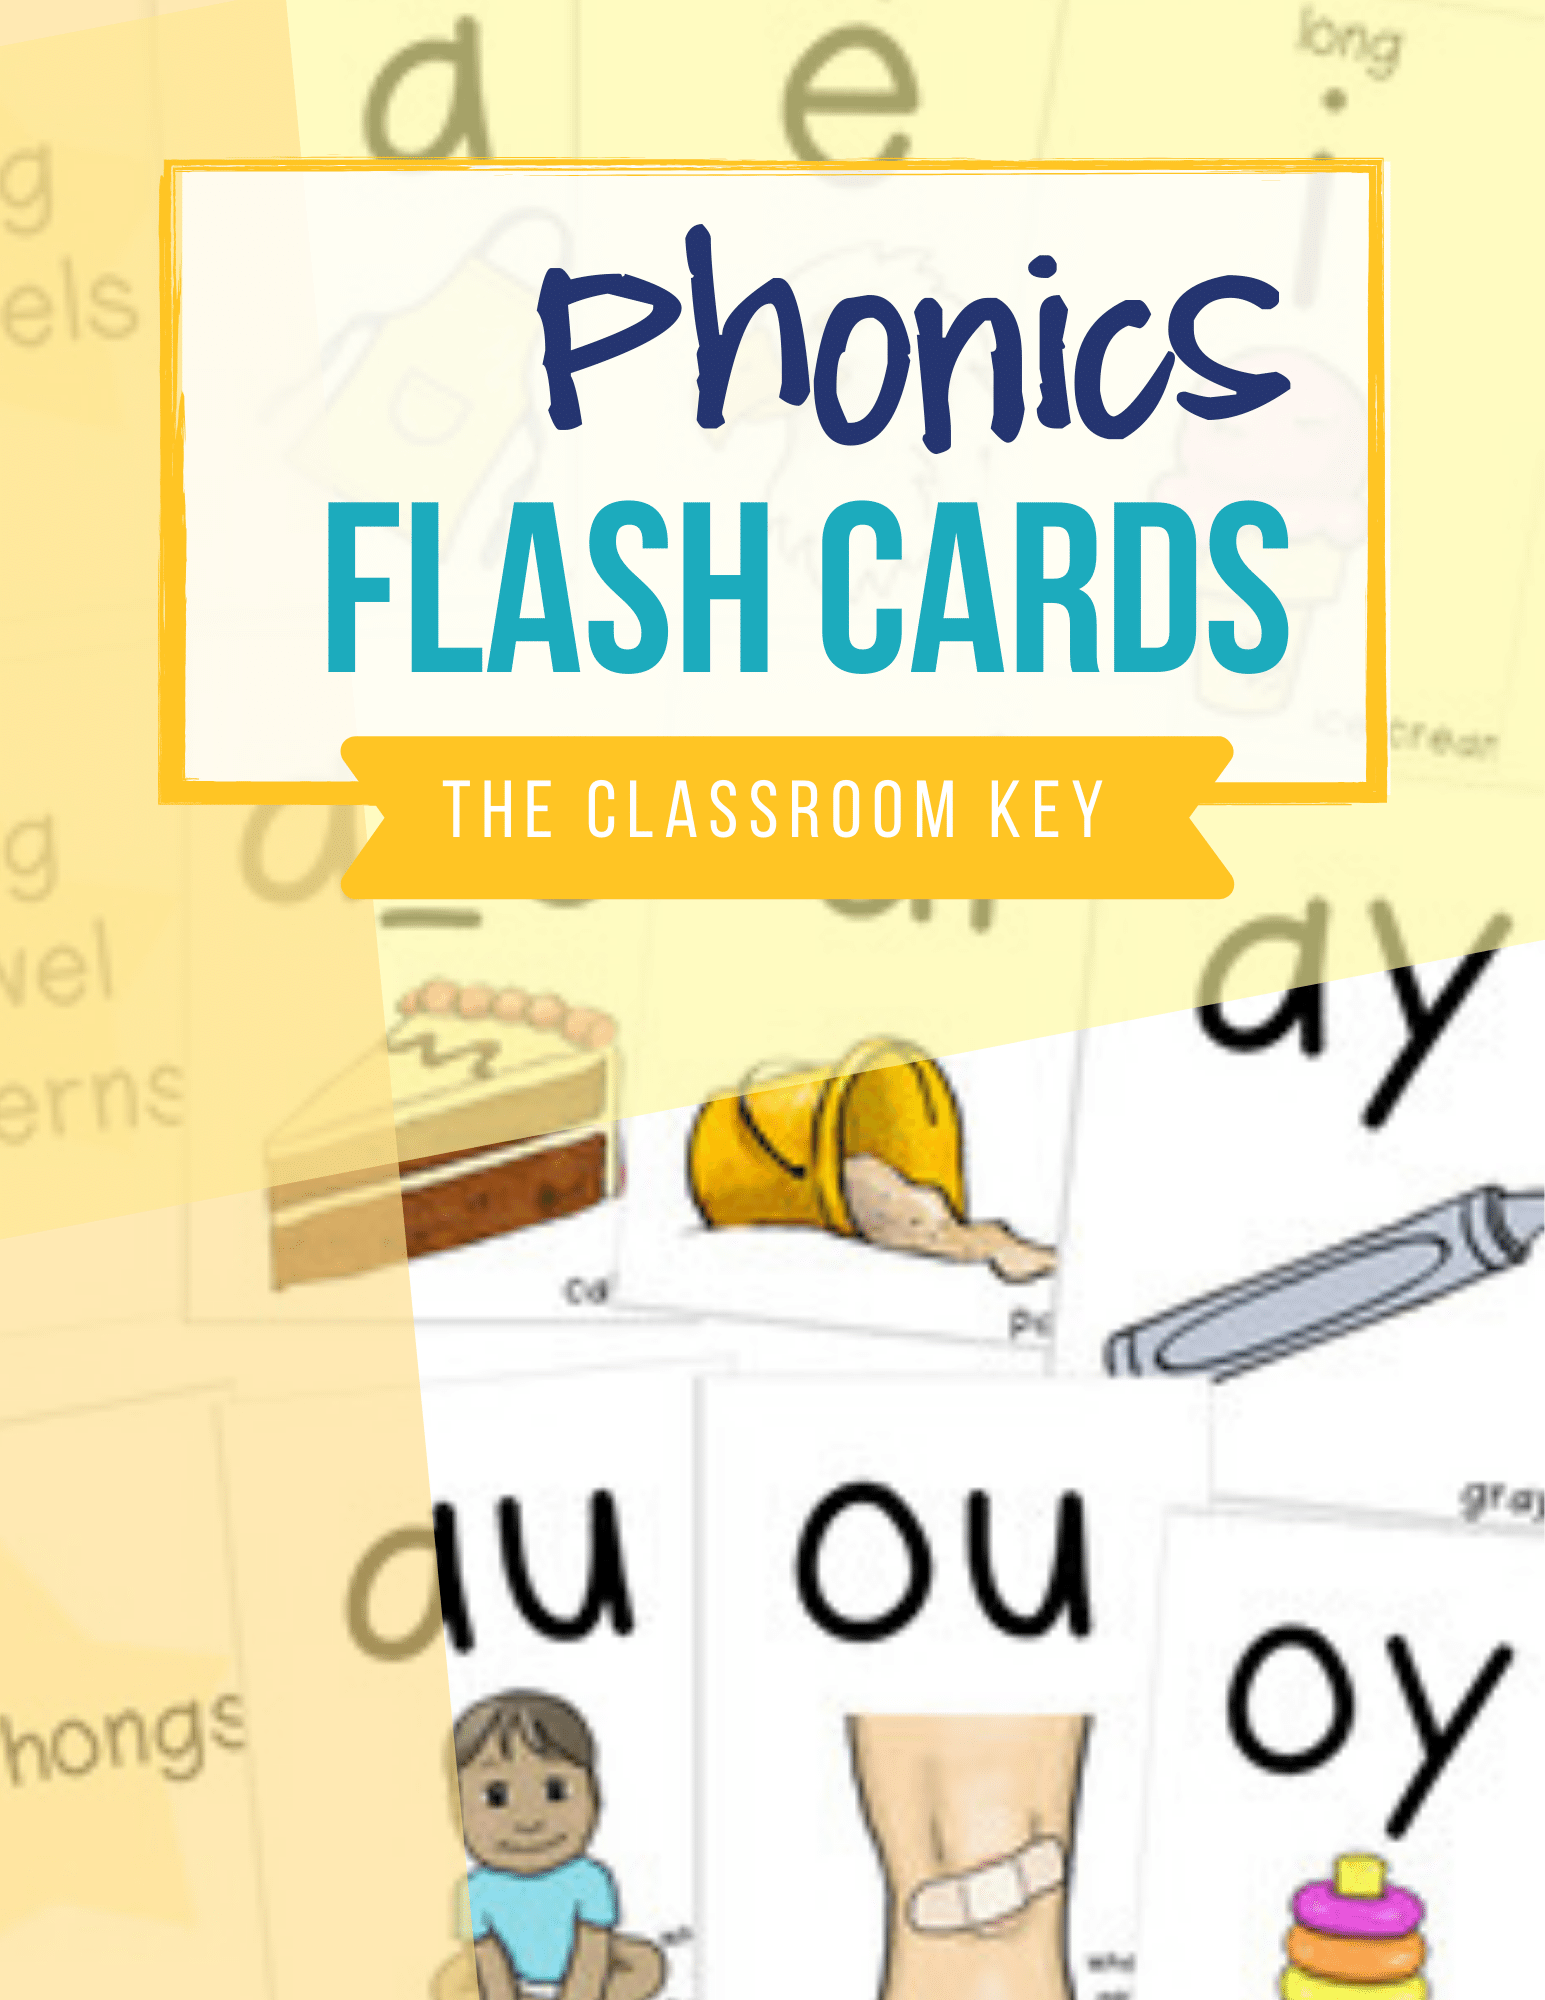 Teach letter sounds, phonemes, and phonics patterns with this set of colorful flash cards. Appropriate for kindergarten, 1st grade, or 2nd grade.